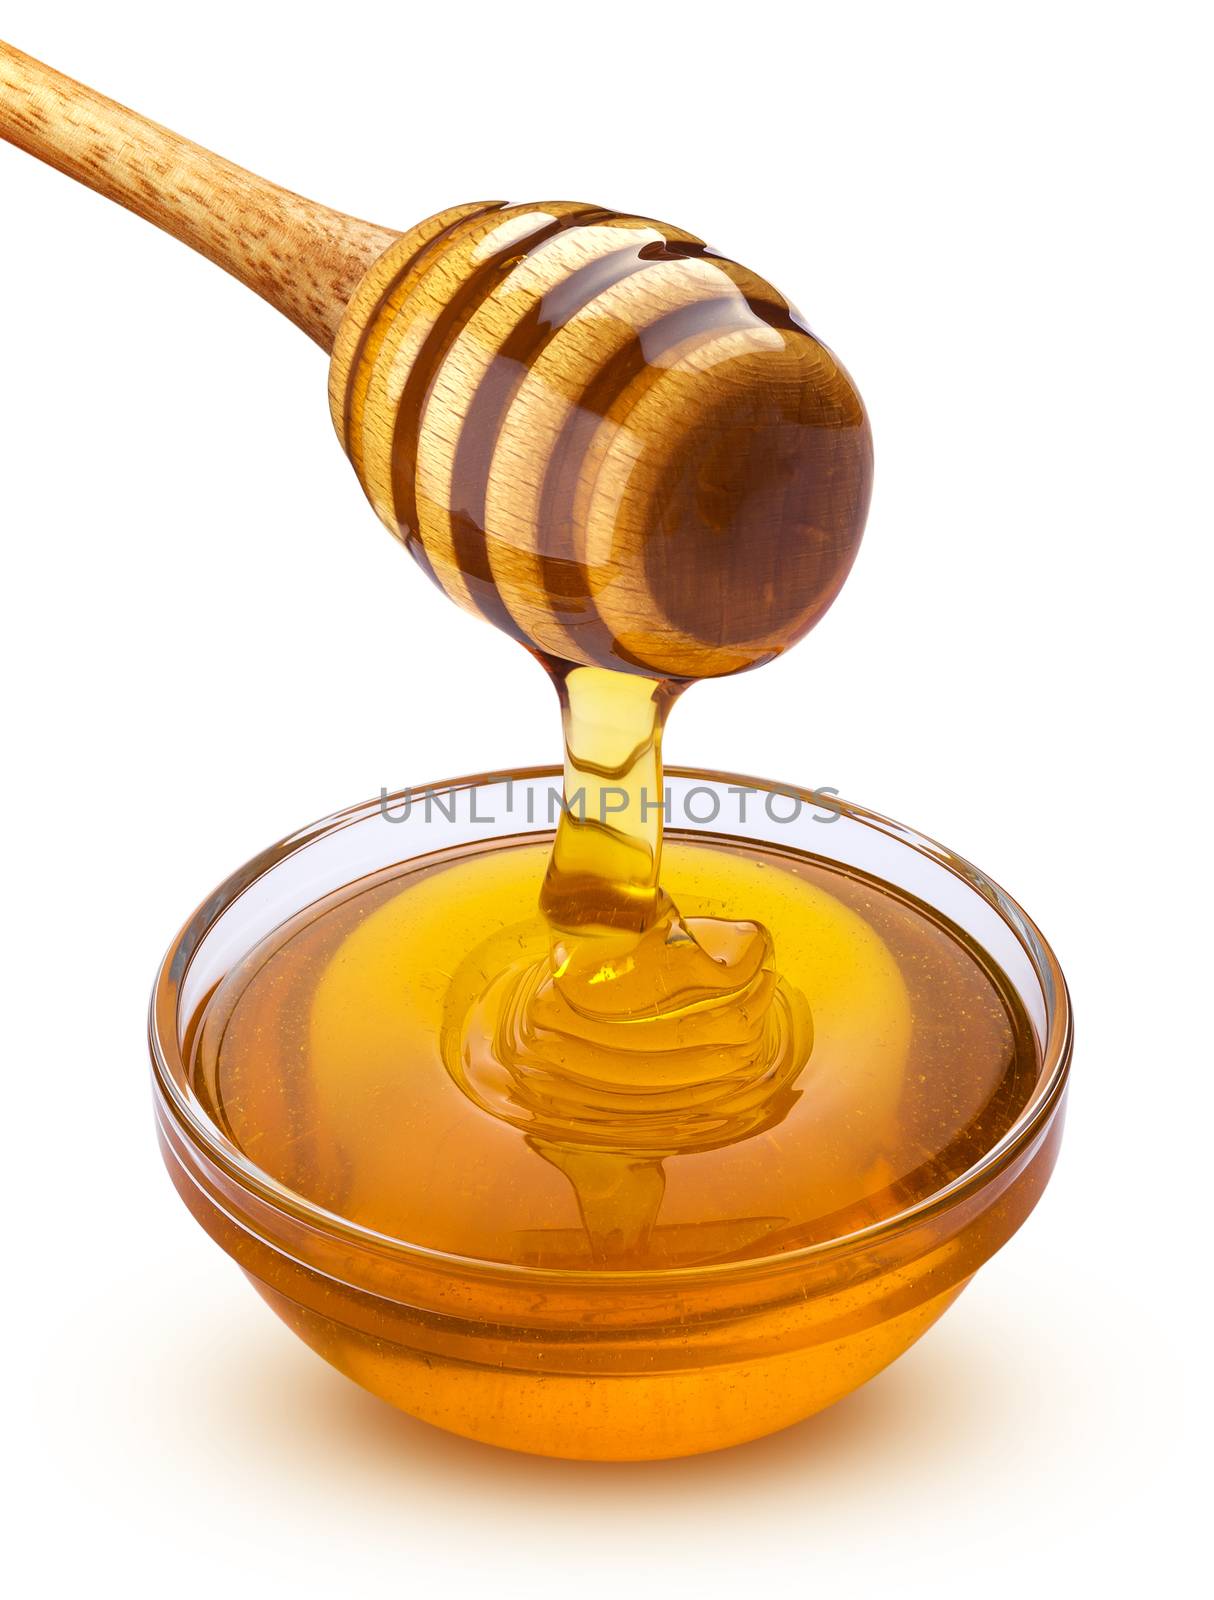 Honey dipper and bowl of pouring honey isolated on white background with clipping path